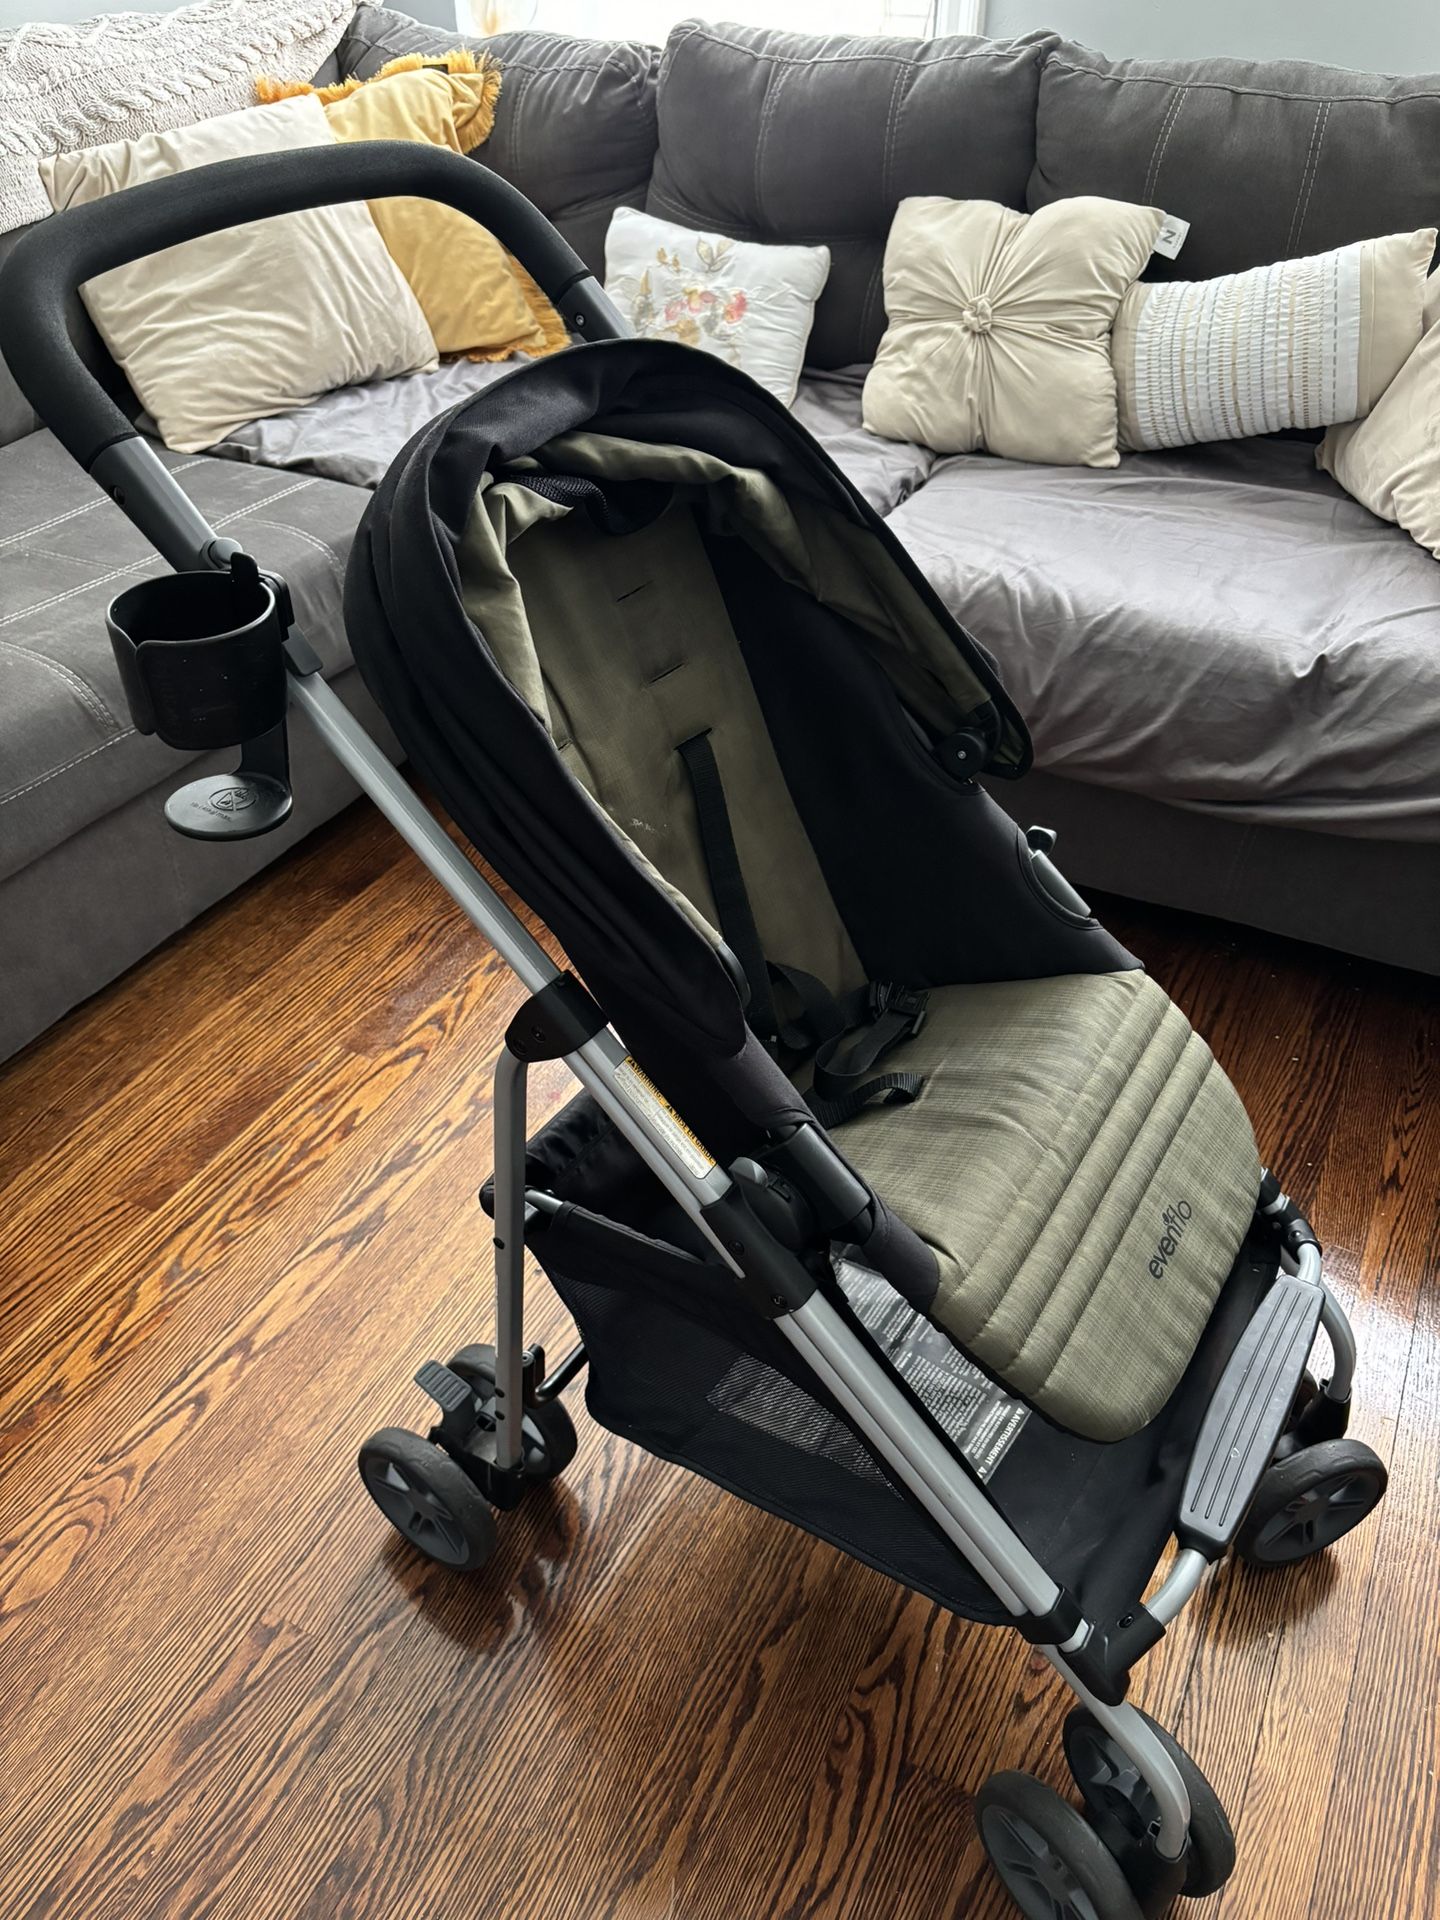 Stroller With Car seat 